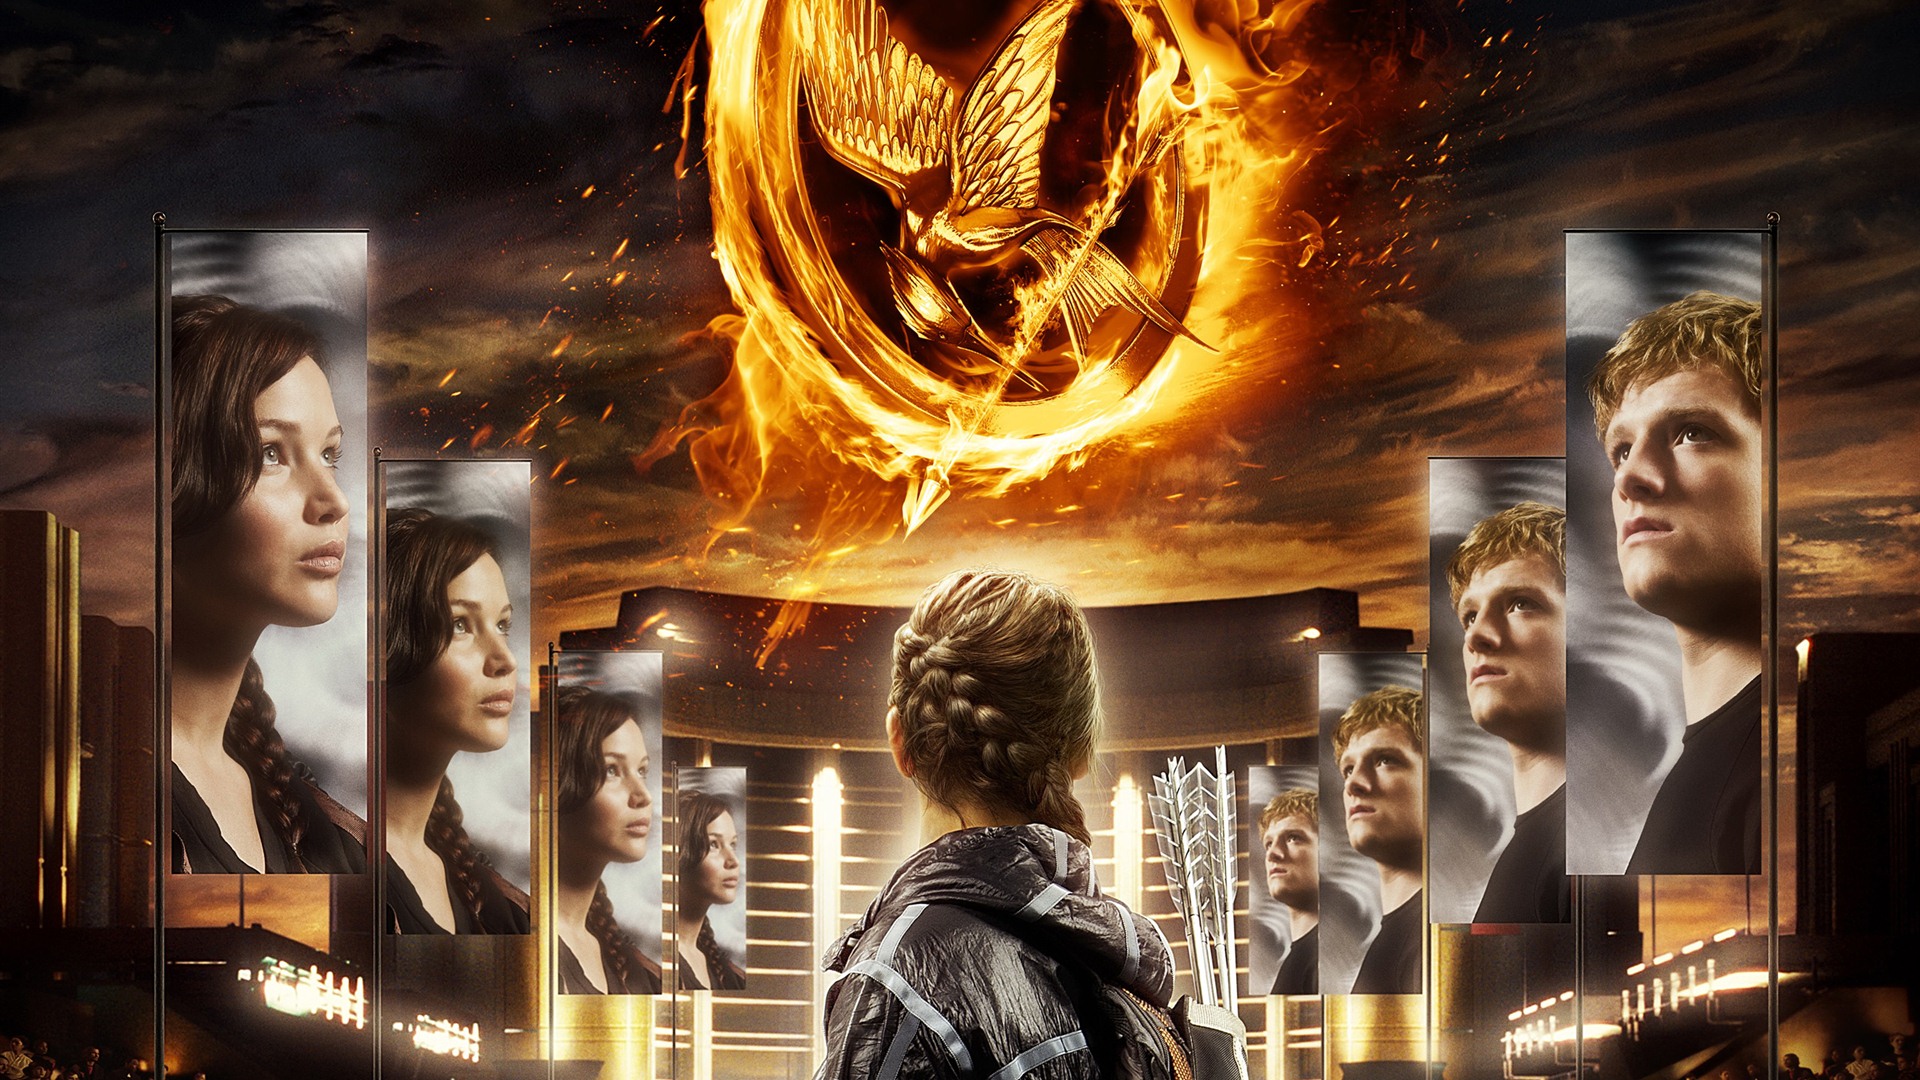 The Hunger Games HD wallpapers #1 - 1920x1080